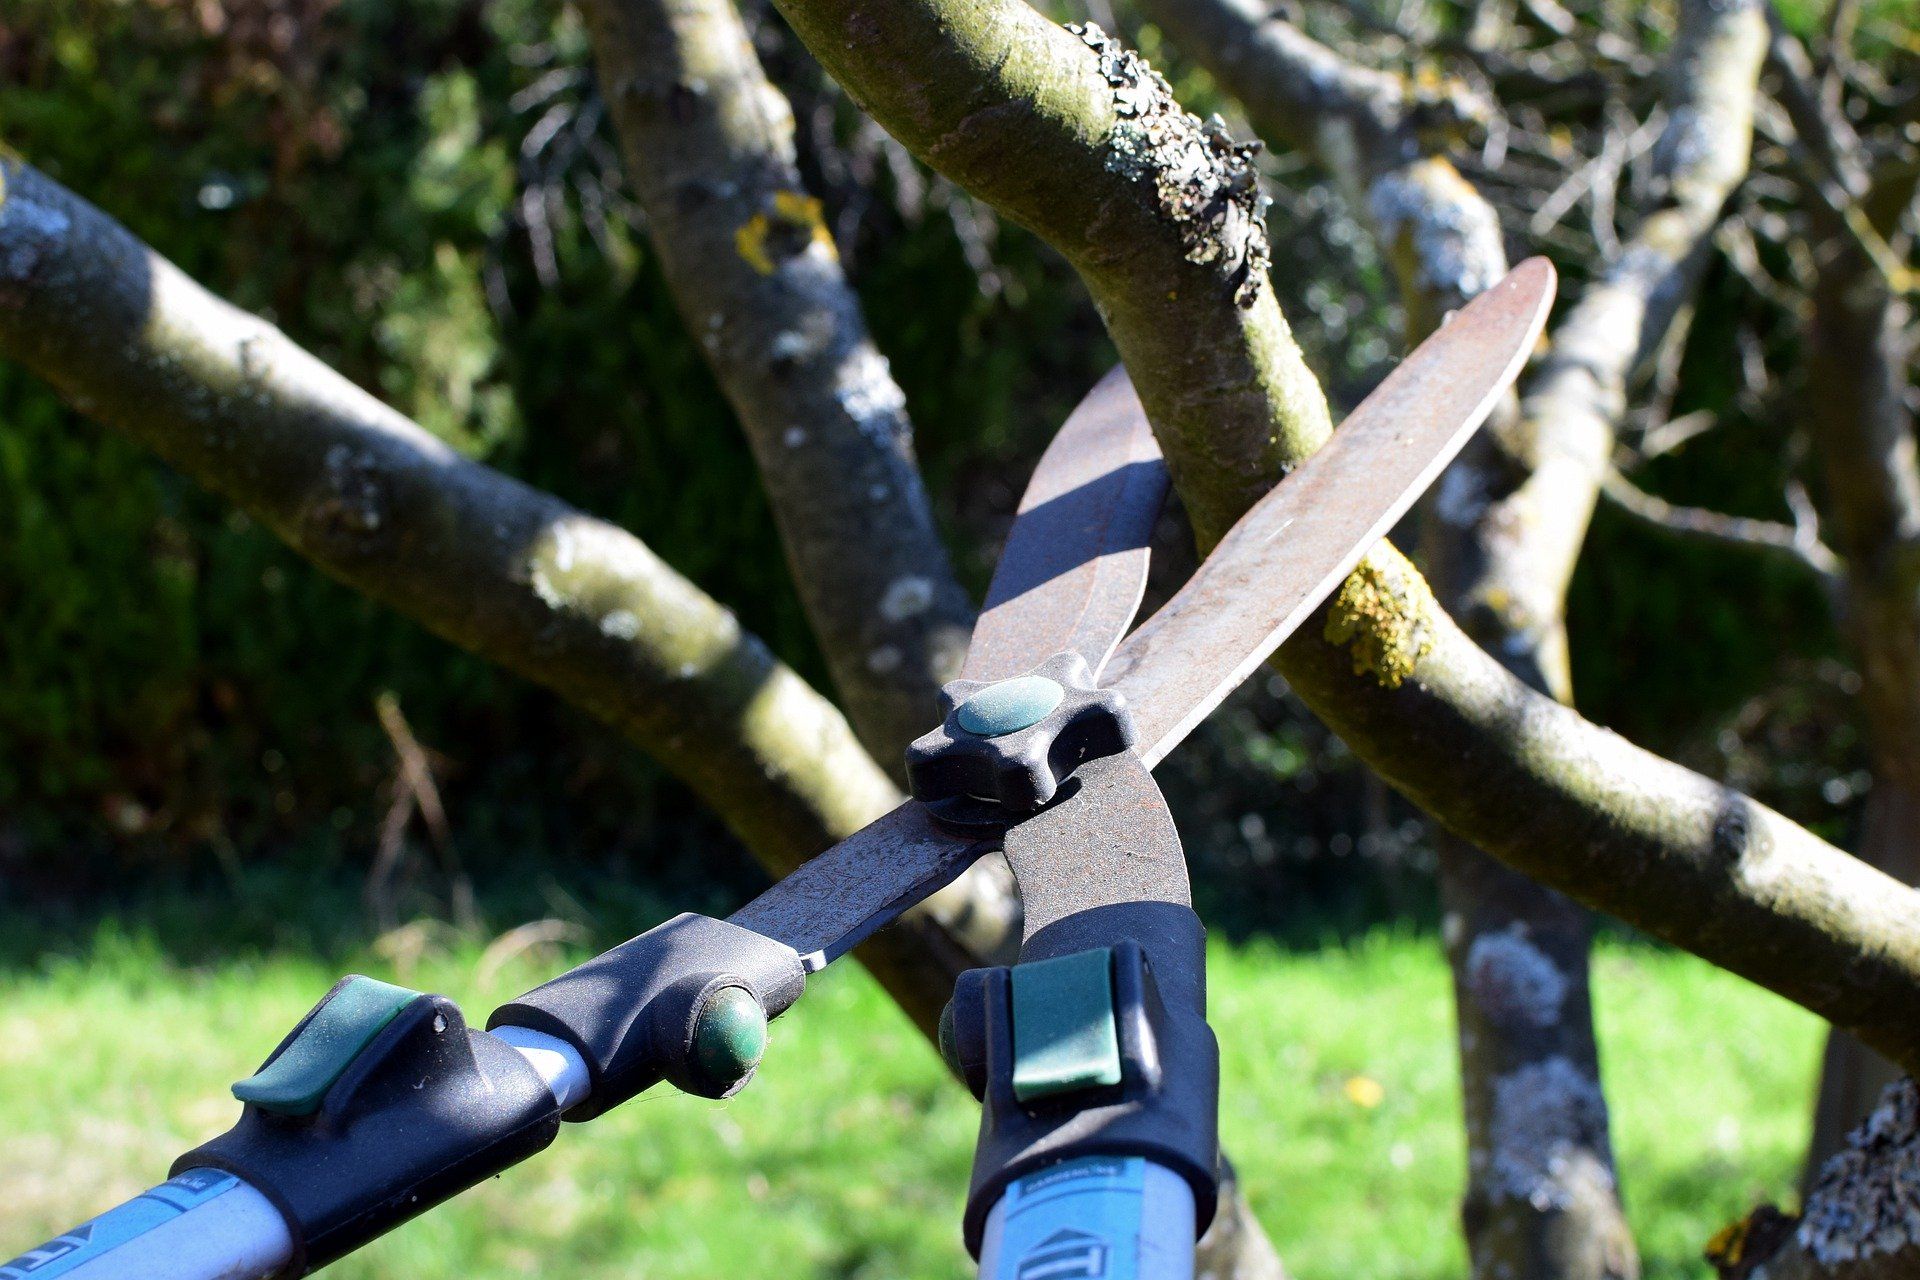 picture of pruning sheers trimming a tree branch